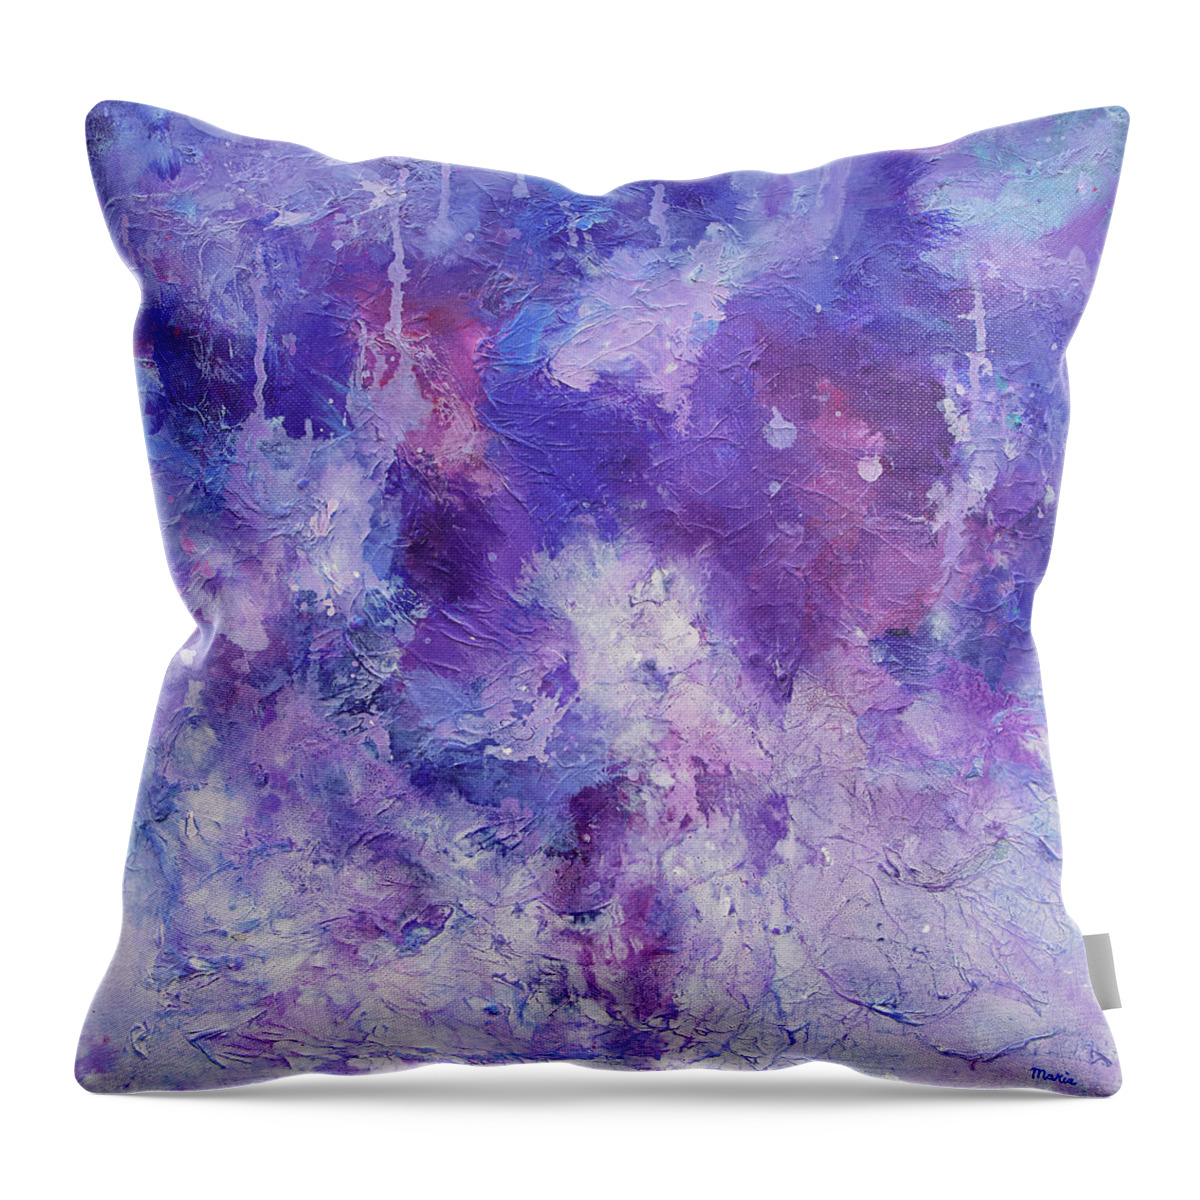 Abstract Throw Pillow featuring the painting Abstract 95 by Maria Meester